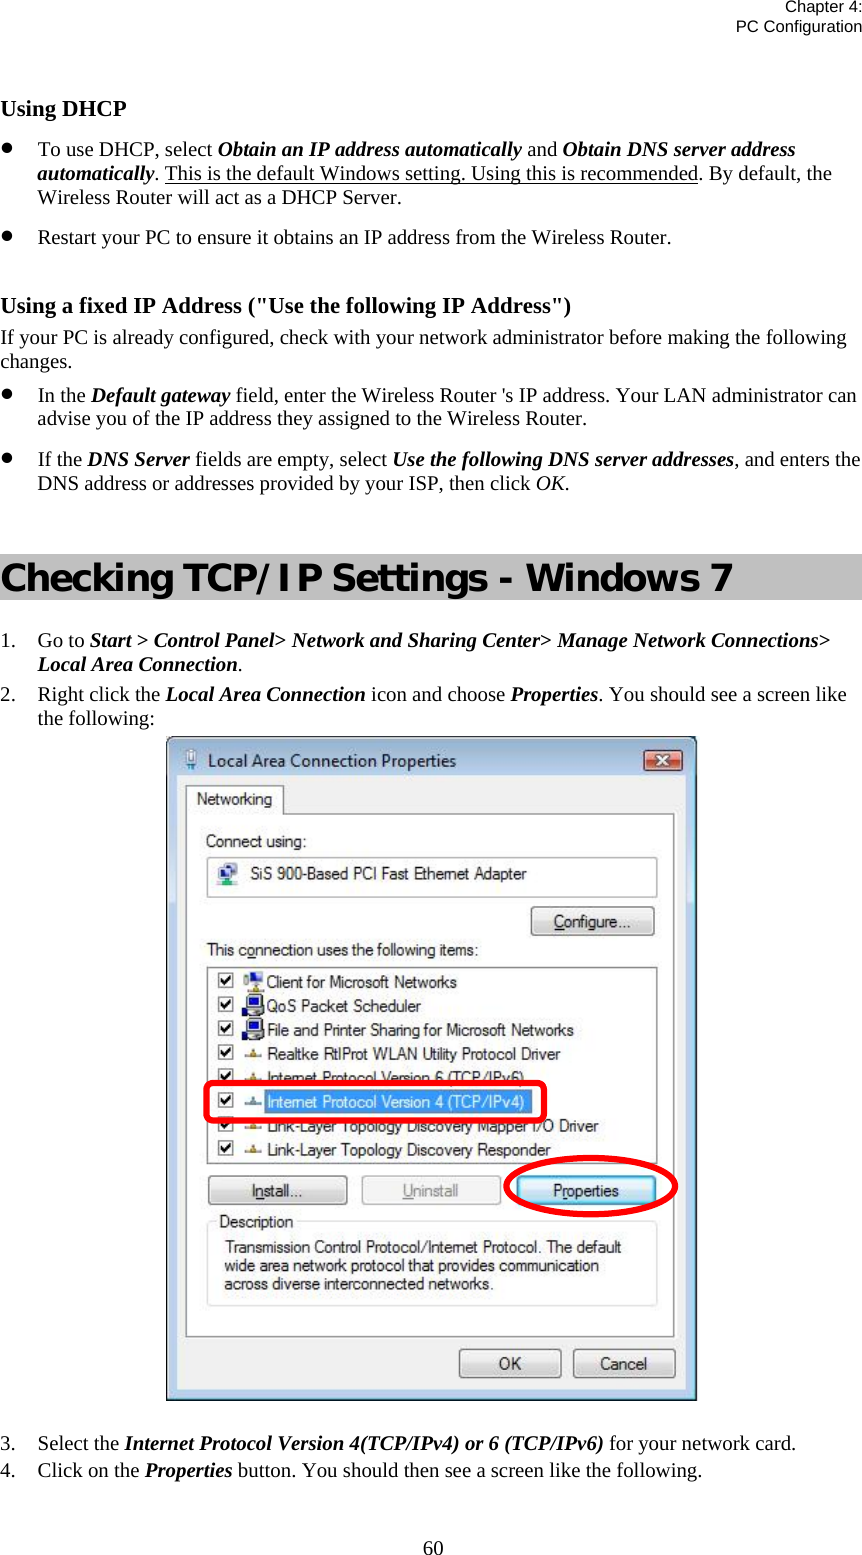   Chapter 4:  PC Configuration  60 Using DHCP • To use DHCP, select Obtain an IP address automatically and Obtain DNS server address automatically. This is the default Windows setting. Using this is recommended. By default, the Wireless Router will act as a DHCP Server. • Restart your PC to ensure it obtains an IP address from the Wireless Router.  Using a fixed IP Address (&quot;Use the following IP Address&quot;) If your PC is already configured, check with your network administrator before making the following changes. • In the Default gateway field, enter the Wireless Router &apos;s IP address. Your LAN administrator can advise you of the IP address they assigned to the Wireless Router. • If the DNS Server fields are empty, select Use the following DNS server addresses, and enters the DNS address or addresses provided by your ISP, then click OK.  Checking TCP/IP Settings - Windows 7 1. Go to Start &gt; Control Panel&gt; Network and Sharing Center&gt; Manage Network Connections&gt; Local Area Connection. 2. Right click the Local Area Connection icon and choose Properties. You should see a screen like the following:  3. Select the Internet Protocol Version 4(TCP/IPv4) or 6 (TCP/IPv6) for your network card. 4. Click on the Properties button. You should then see a screen like the following. 